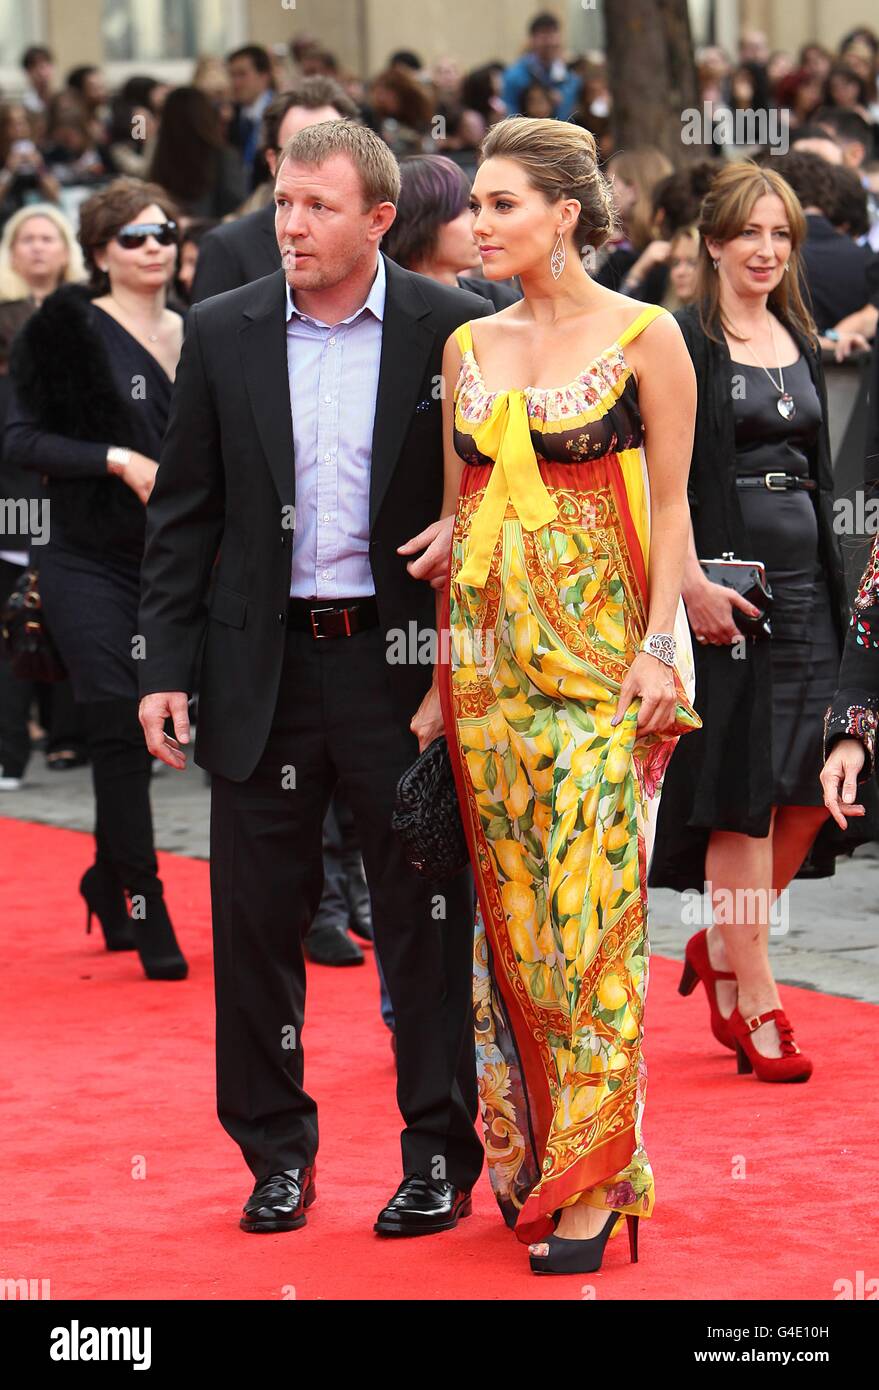 Guy Ritchie and girlfriend Jacqui Ainsley arriving for the world premiere of Harry Potter And The Deathly Hallows: Part 2. Stock Photo